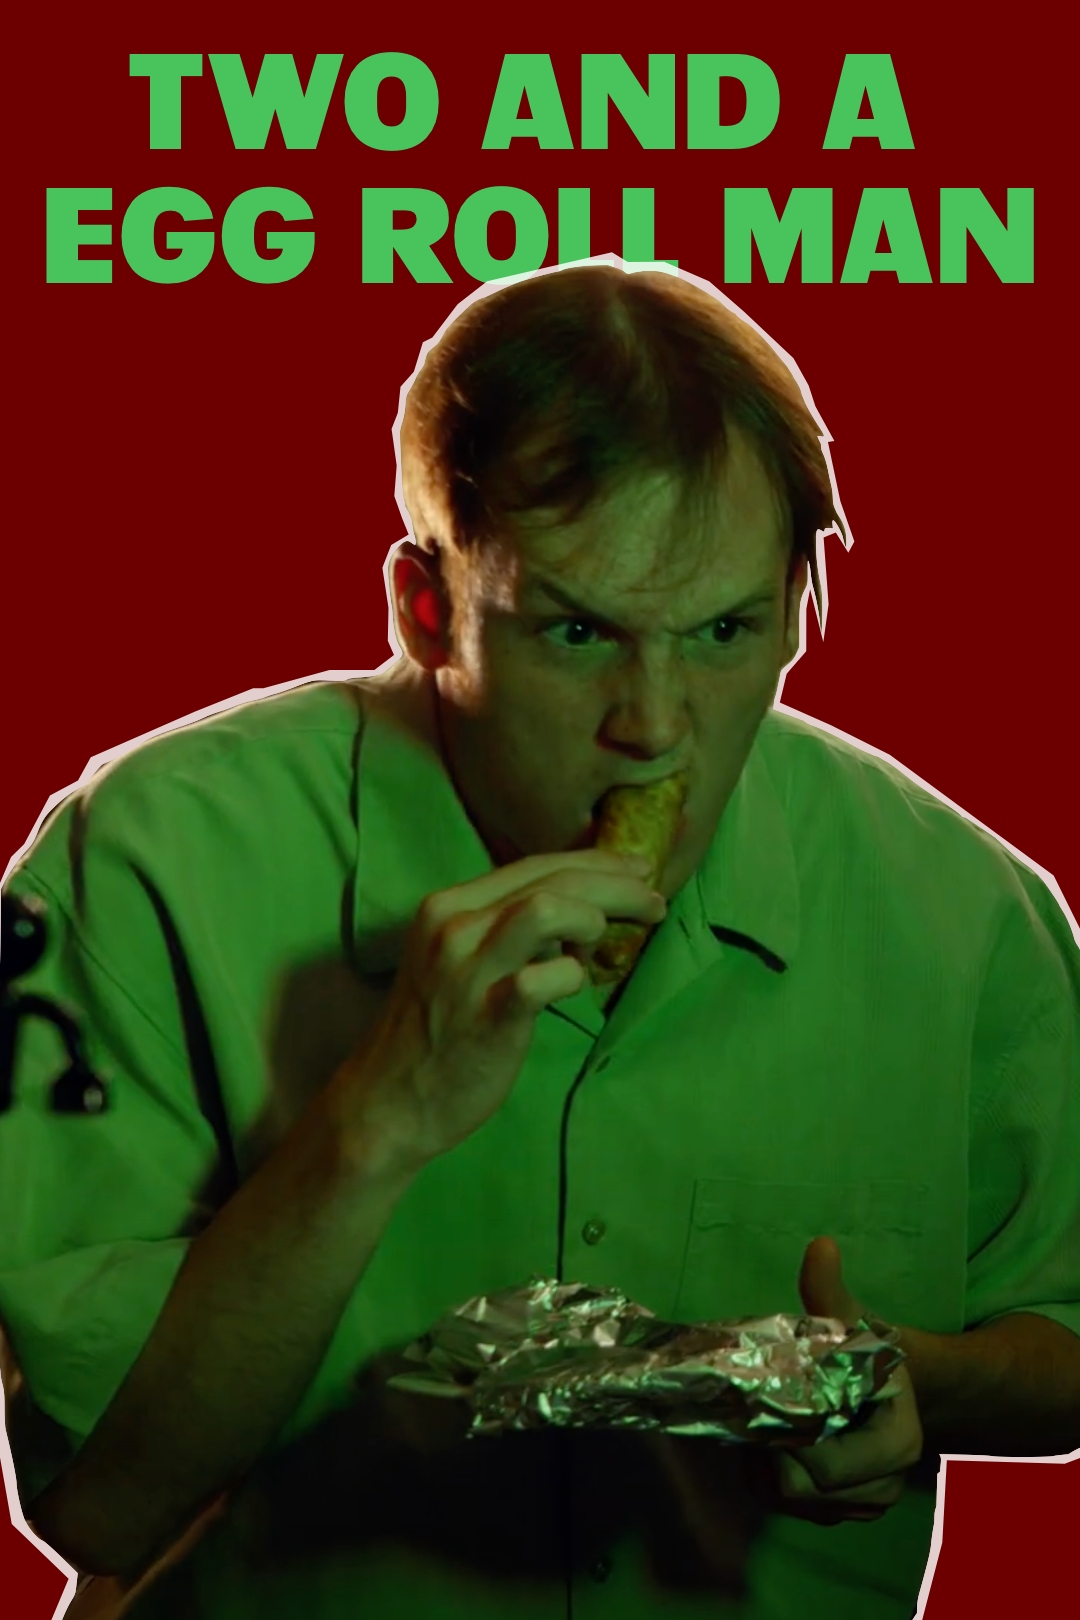 Poster for the film "Two and a Egg Roll Man"